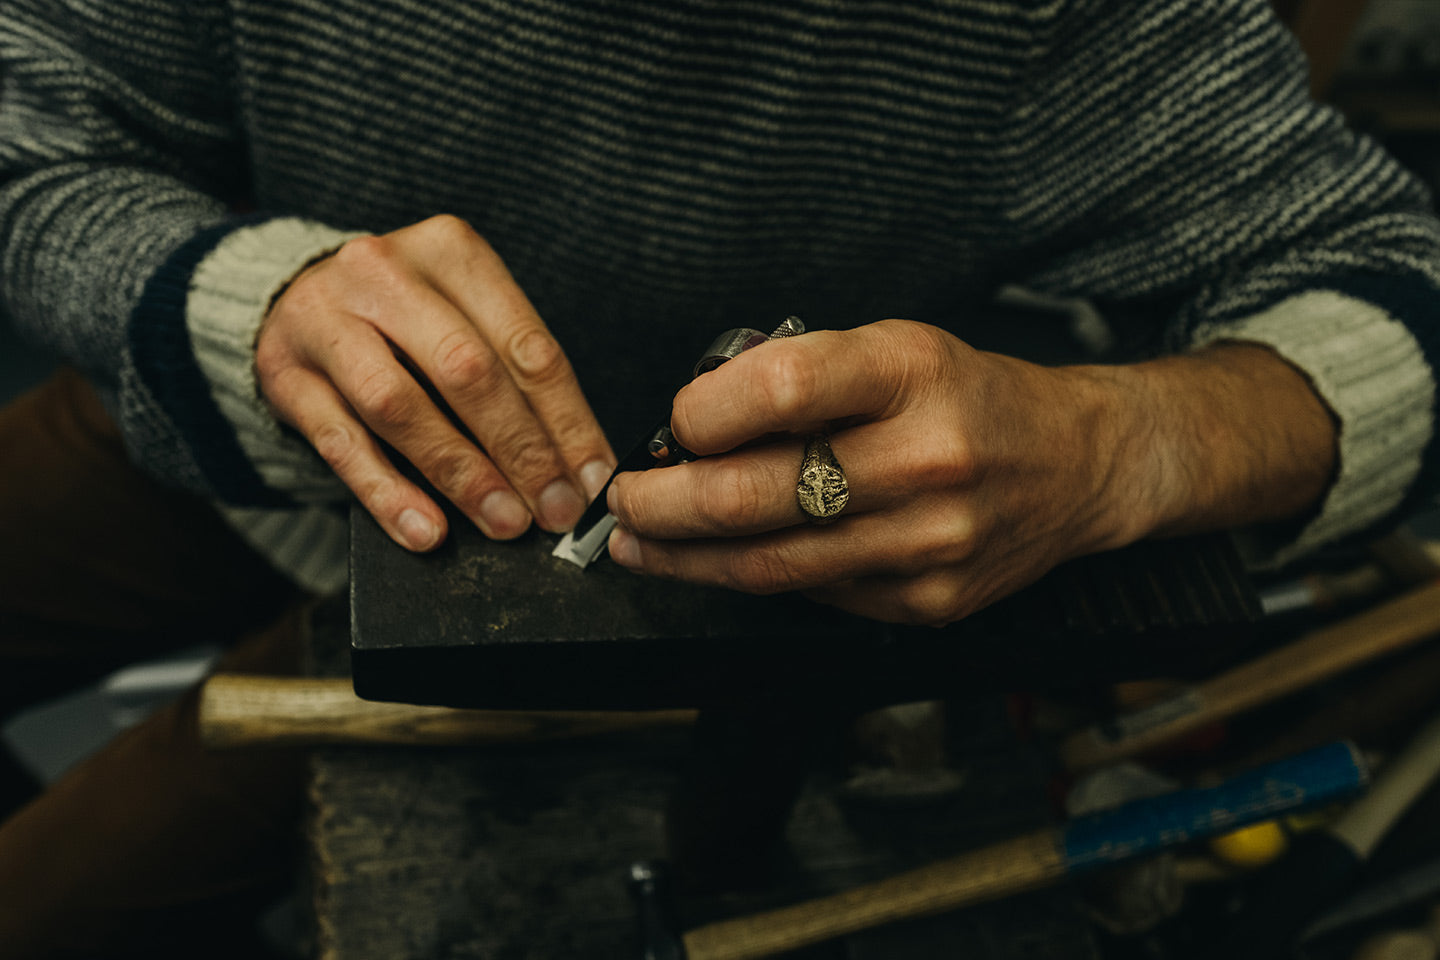 Sandcast Extra Texture Signet Ring worn on middle finger by jeweller in their workshop